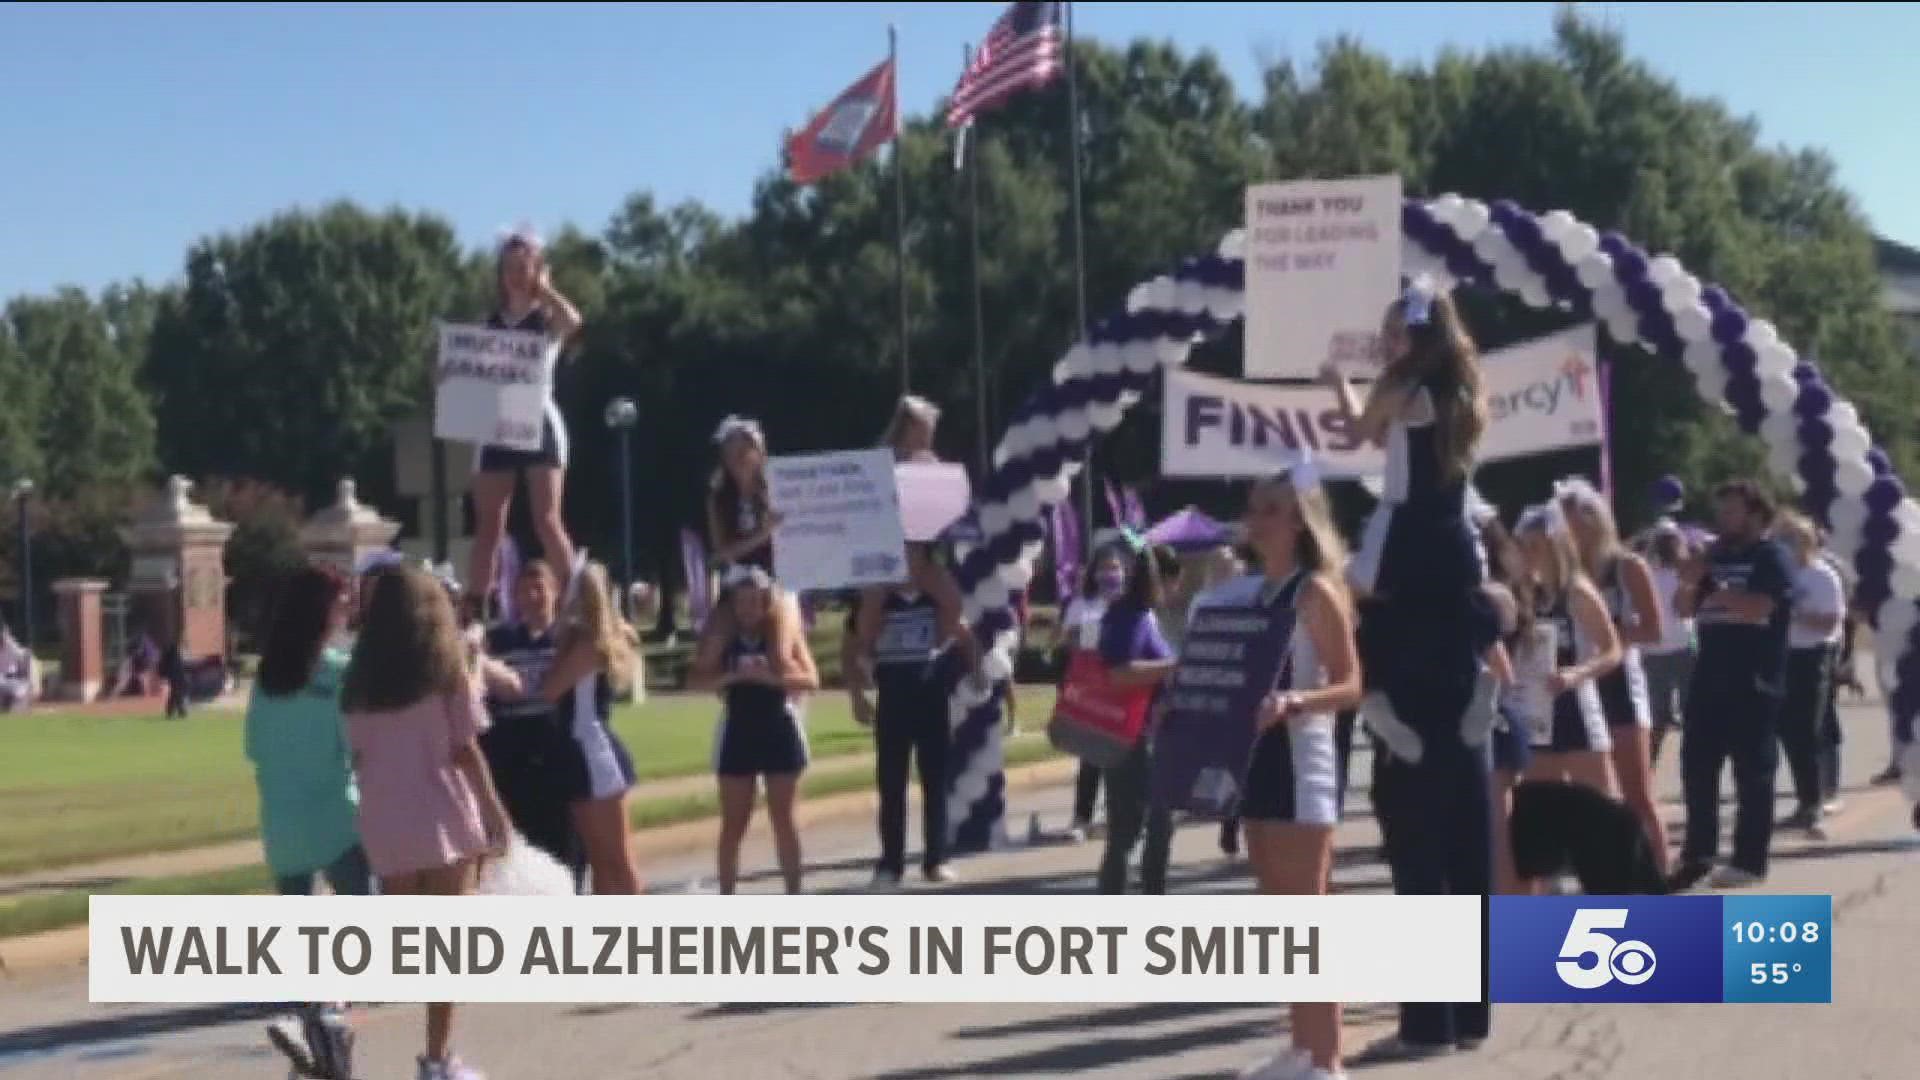 The Walk to End Alzheimer's raised thousands of dollars towards the cause in Fort Smith.